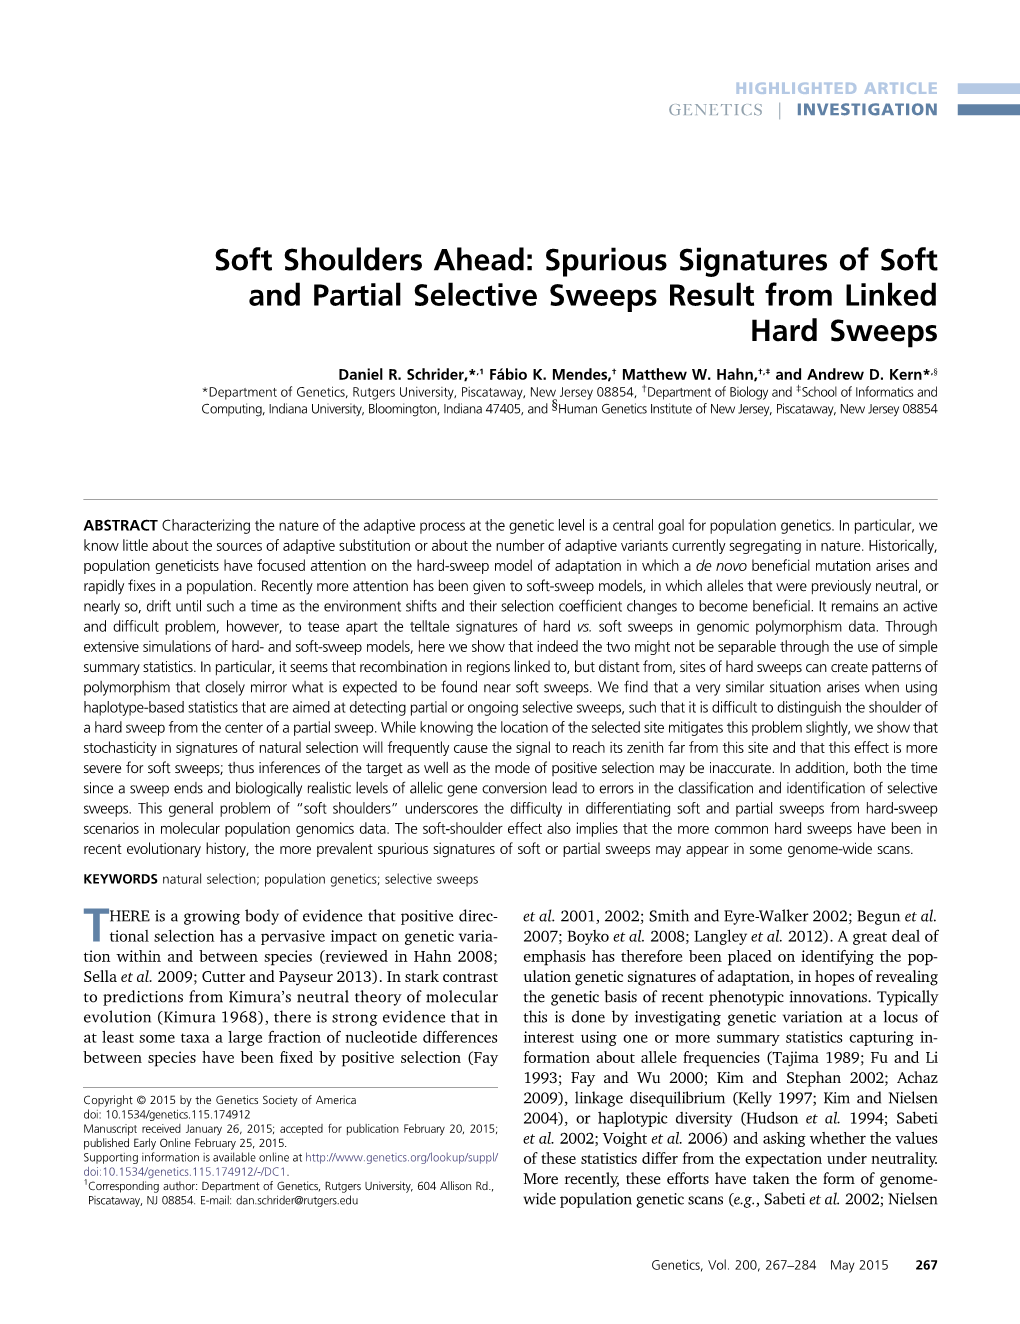 Spurious Signatures of Soft and Partial Selective Sweeps Result from Linked Hard Sweeps